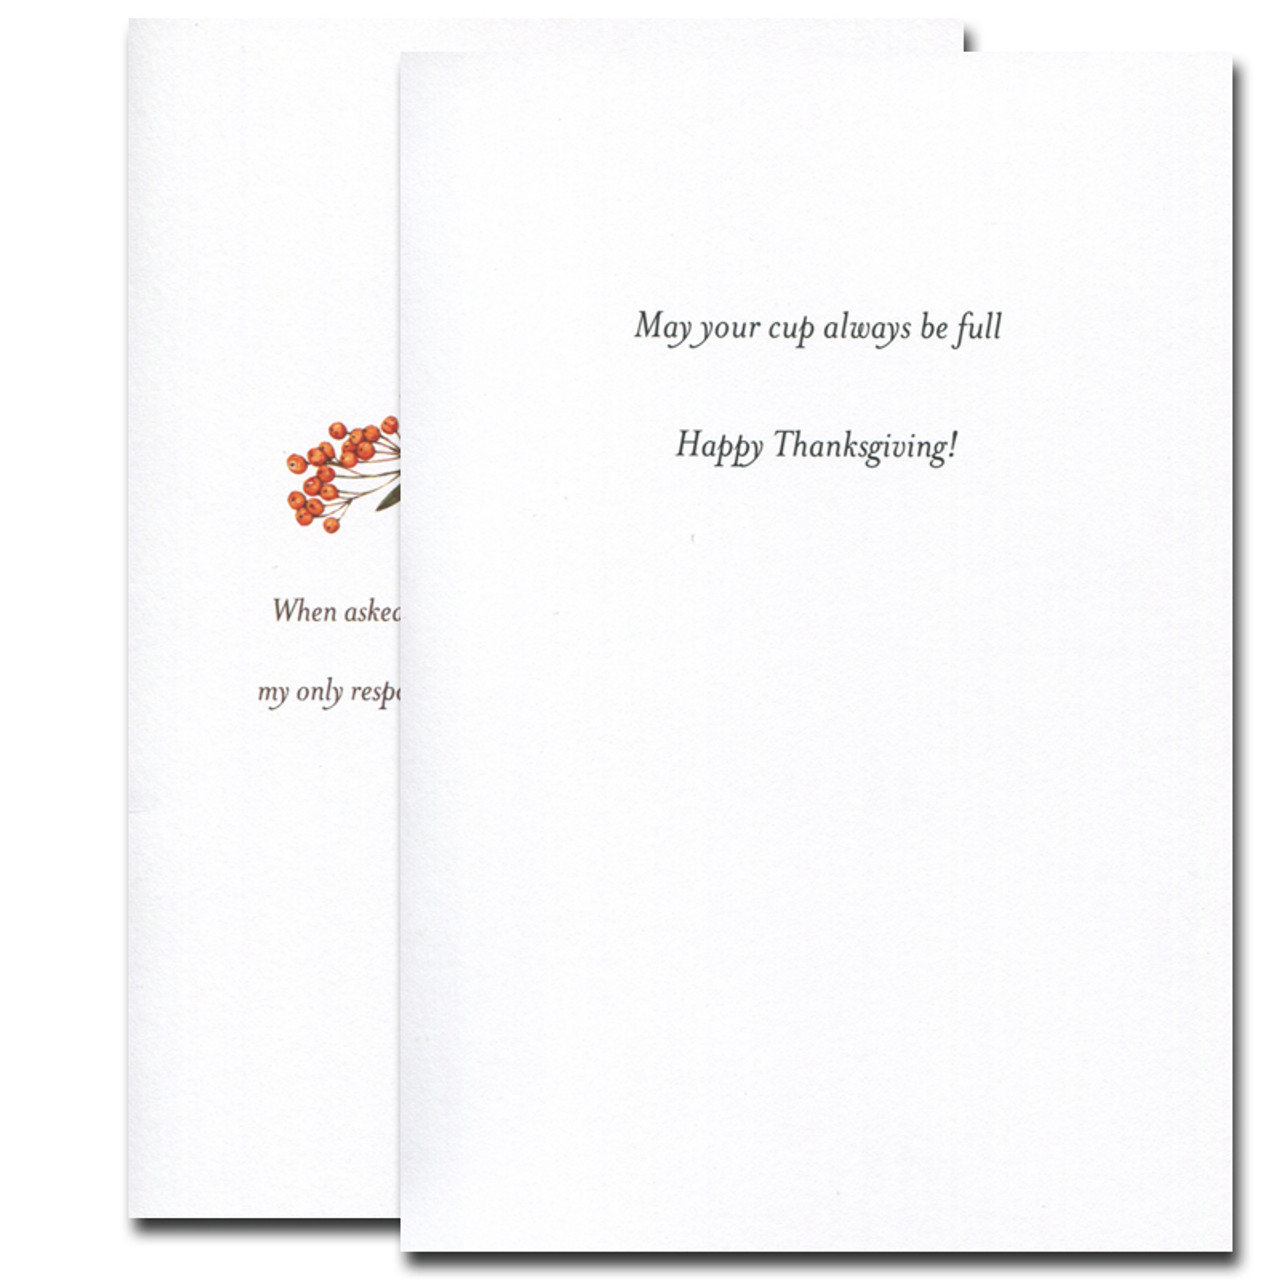 Cup Thanksgiving card inside reads: May your cup always be full. Happy Thanksgiving!